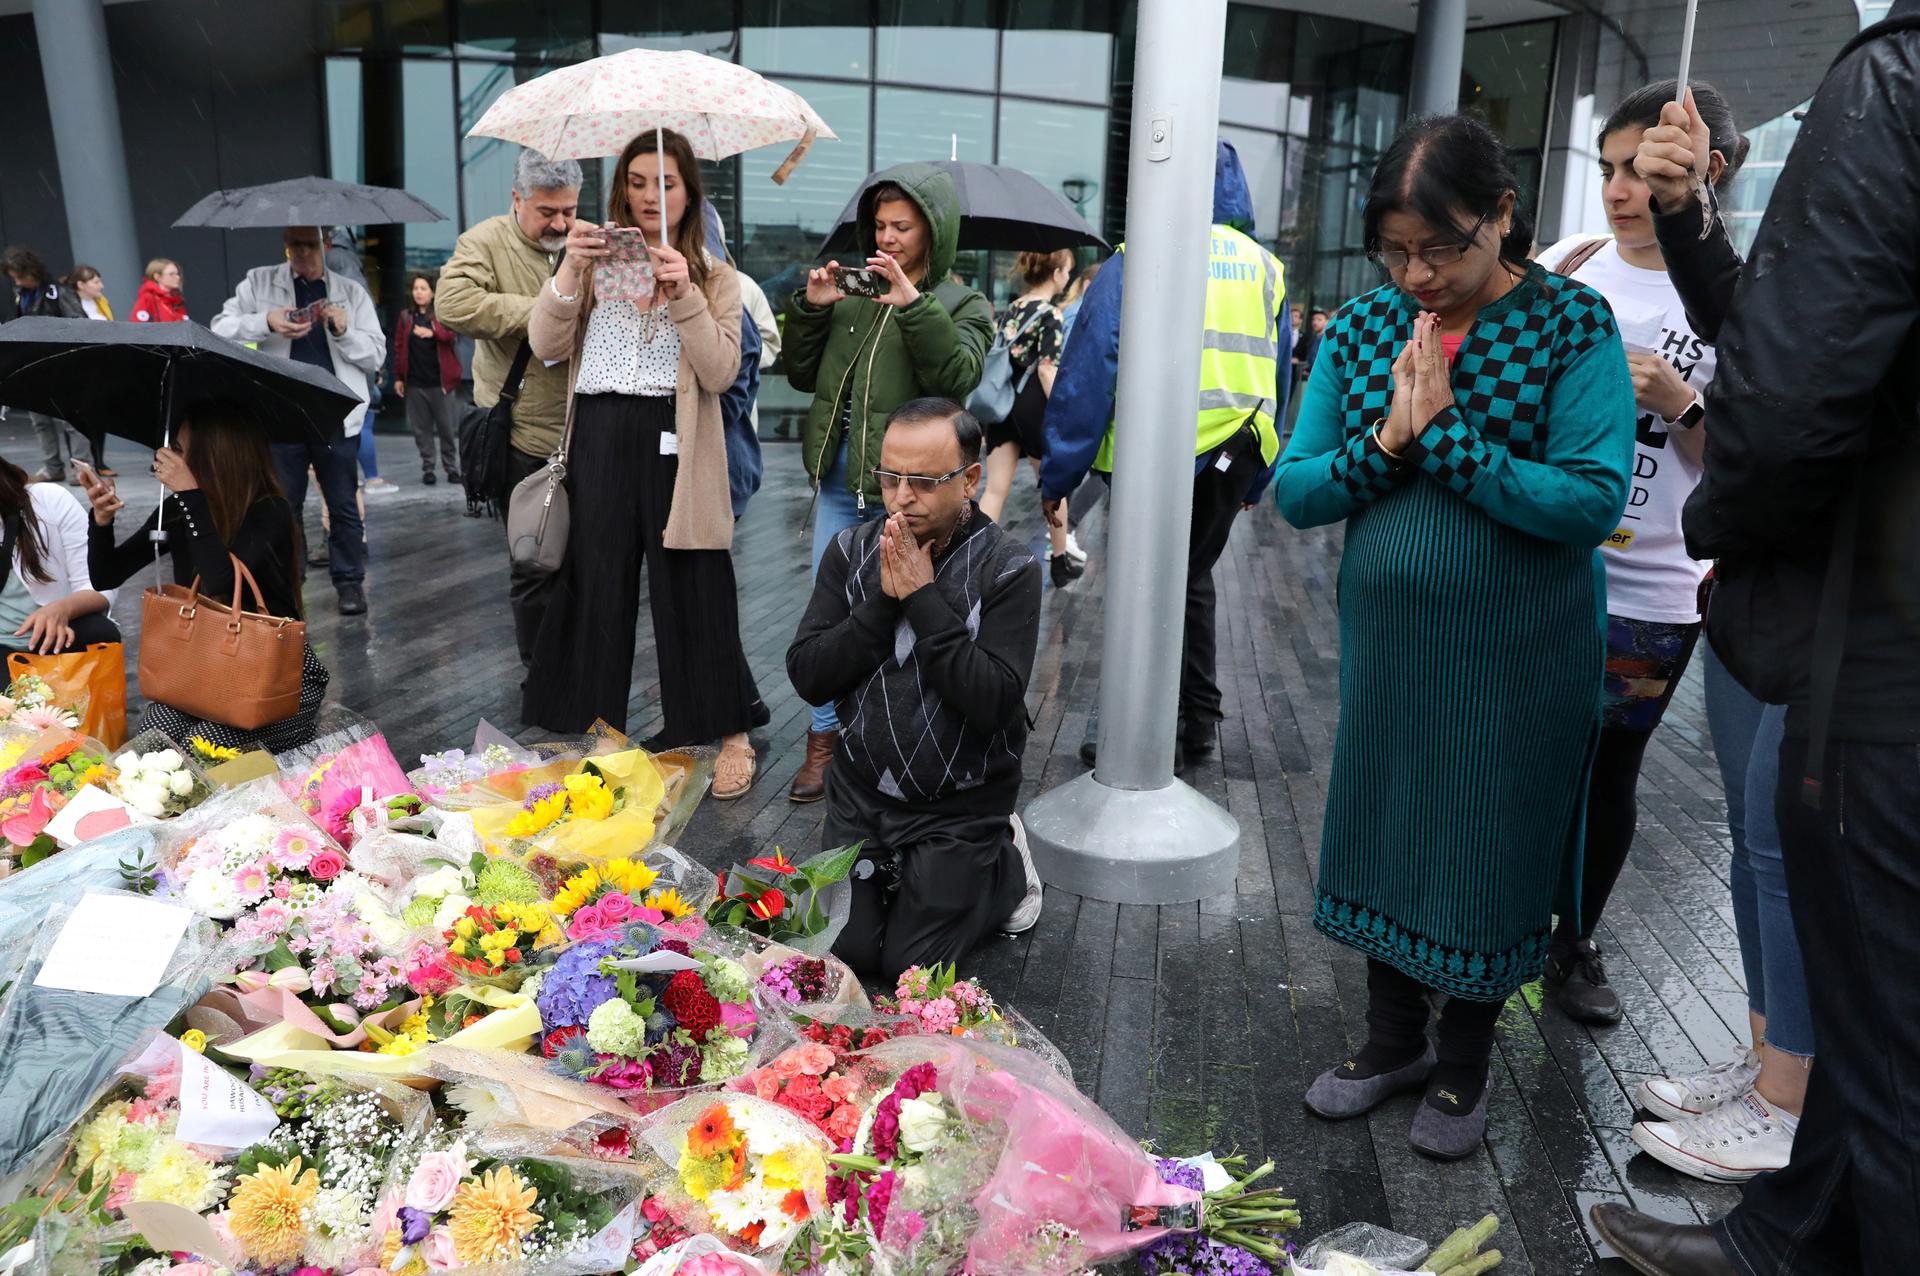 People pray after a vigil to remember the victims of the attack on London Bridge and Borough Market, at Potters Field Park, in central London, Britain, June 5, 2017.